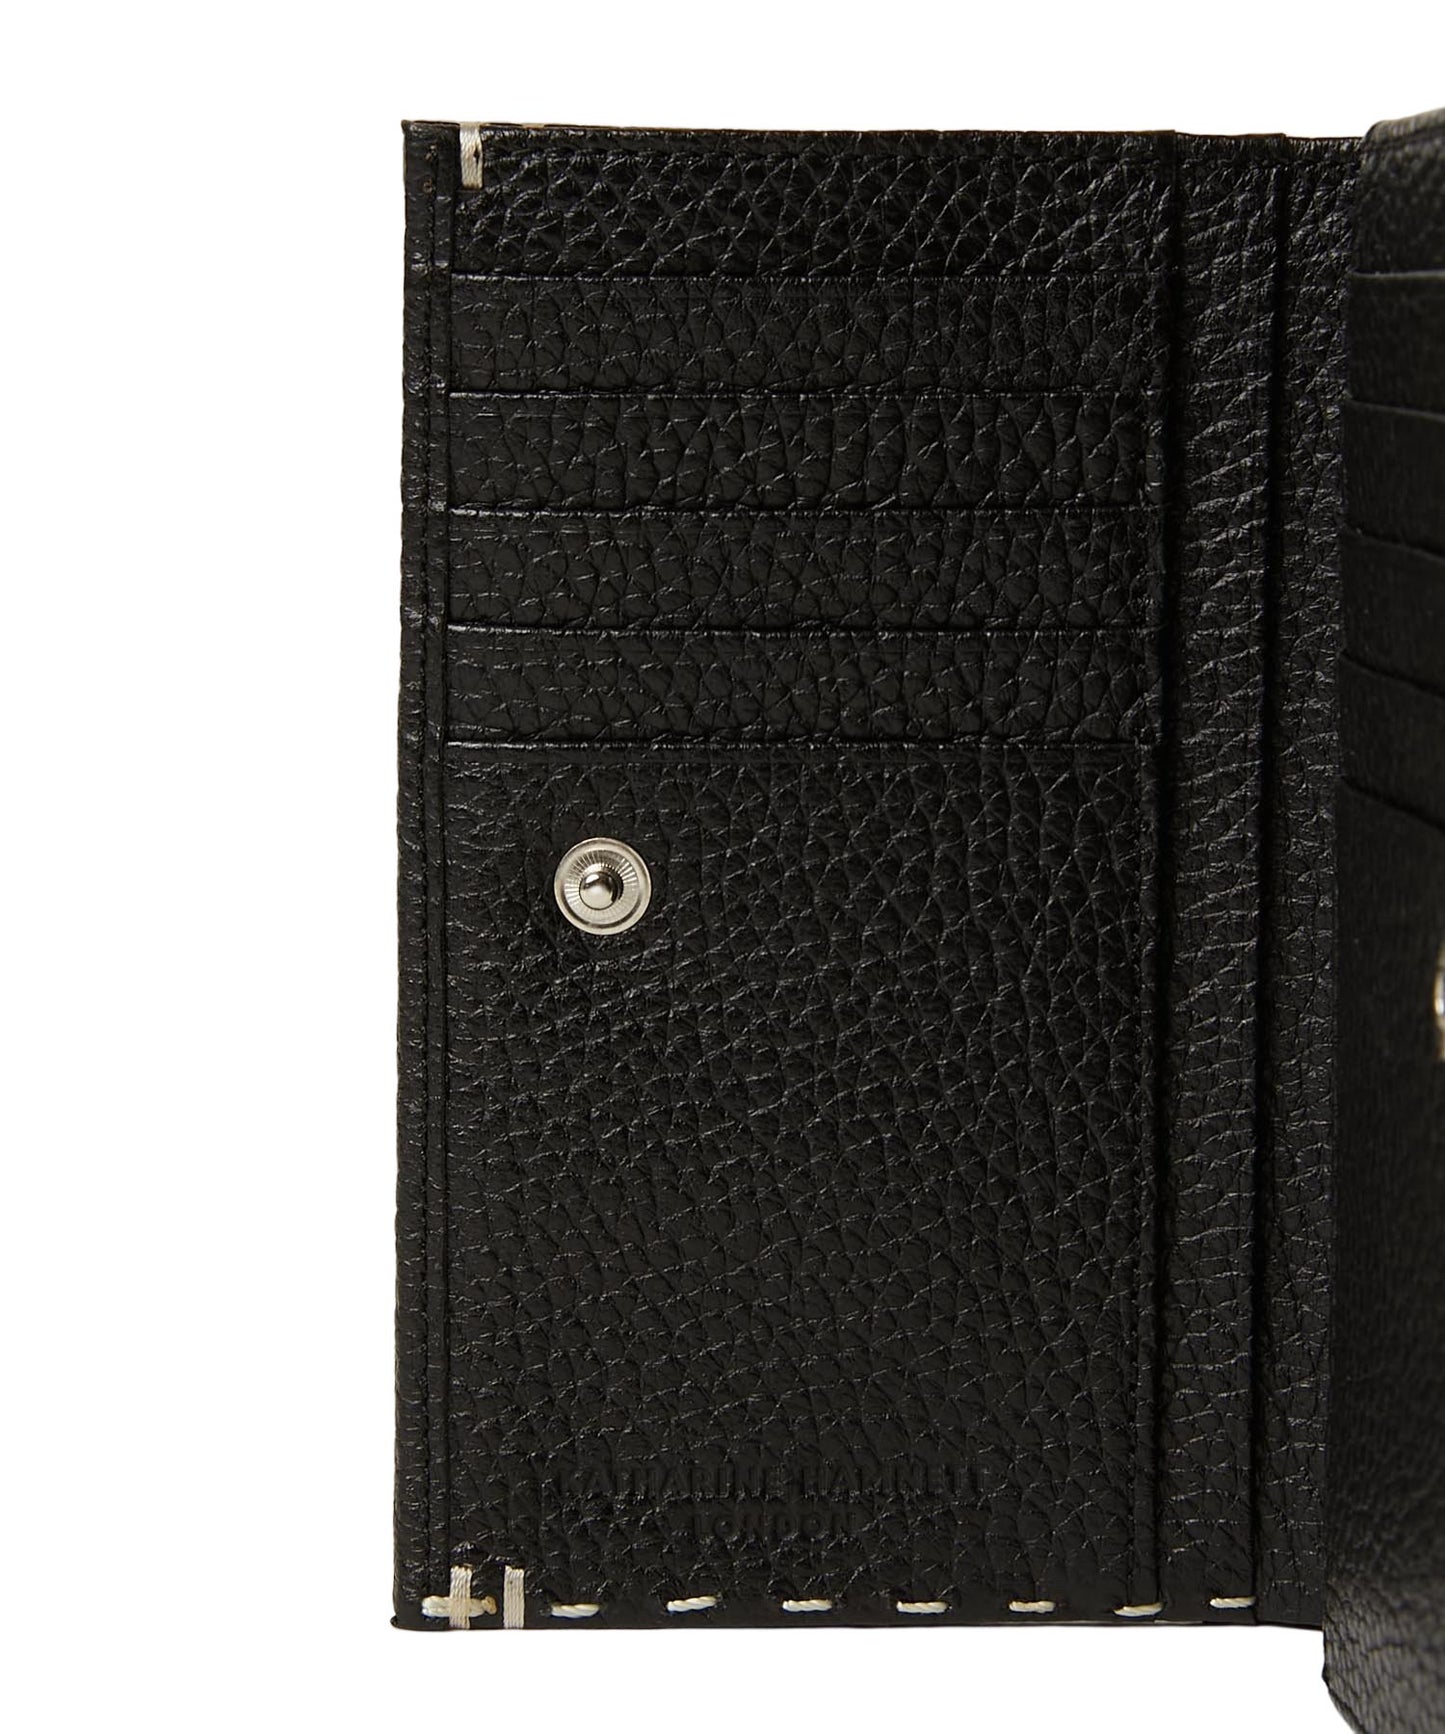 【10%OFF】＜UNISEX＞【WEB限定】STITCHED L ZIP MIDDLE WALLET